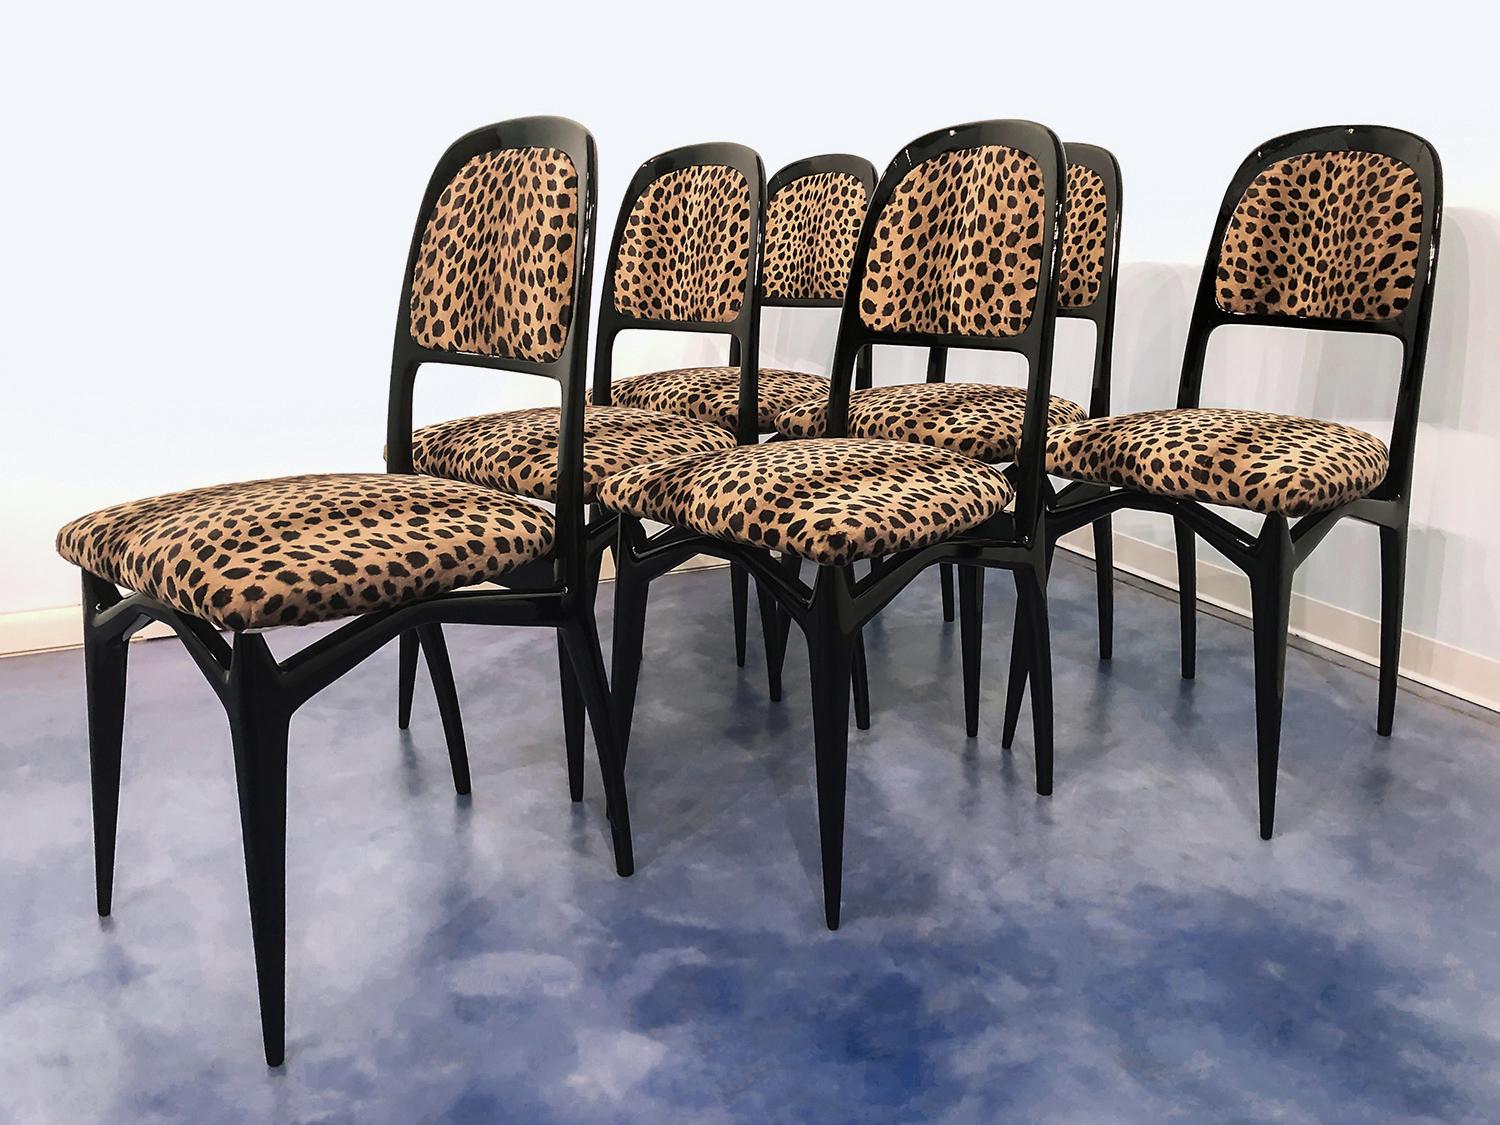 Elegant lines for this very rare set of six dining chairs designed by Vittorio Dassi in the 1950s.
They have all been recently restored and now are ready to use.
The structures are finished of lacquered ebonized wood with the seats upholstered in